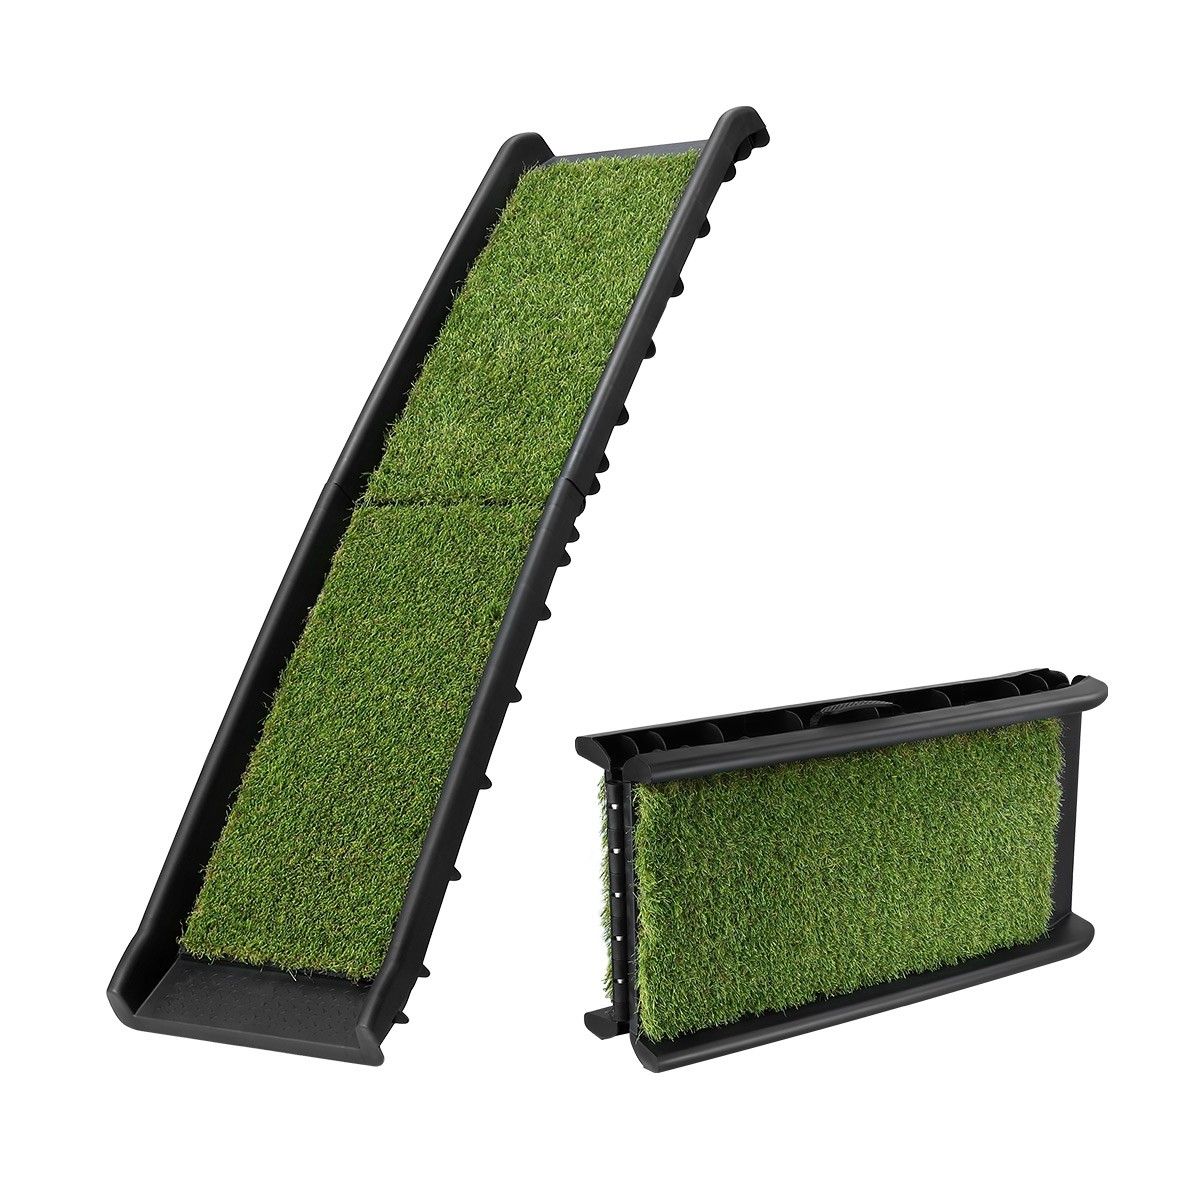 Dog Ramp Car Stairs Puppy Steps Doggy Pet Climbing Ladder Artificial Grass for SUV Folding